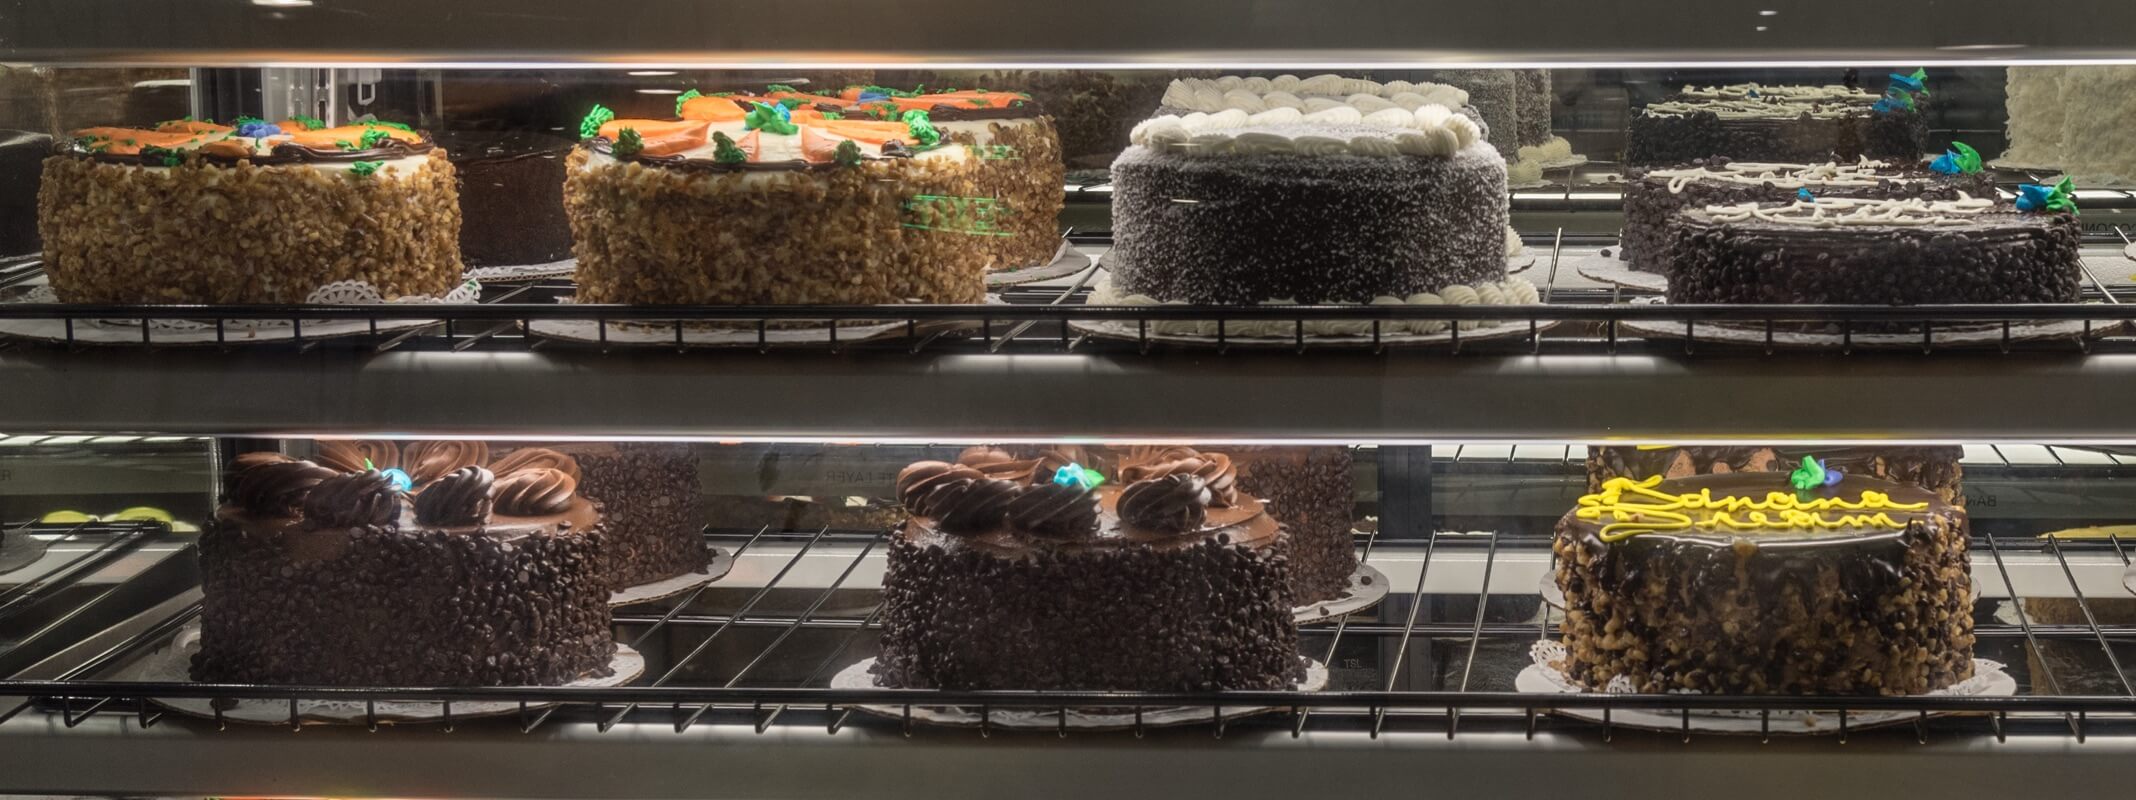 Gourmet specialty cakes in a display case